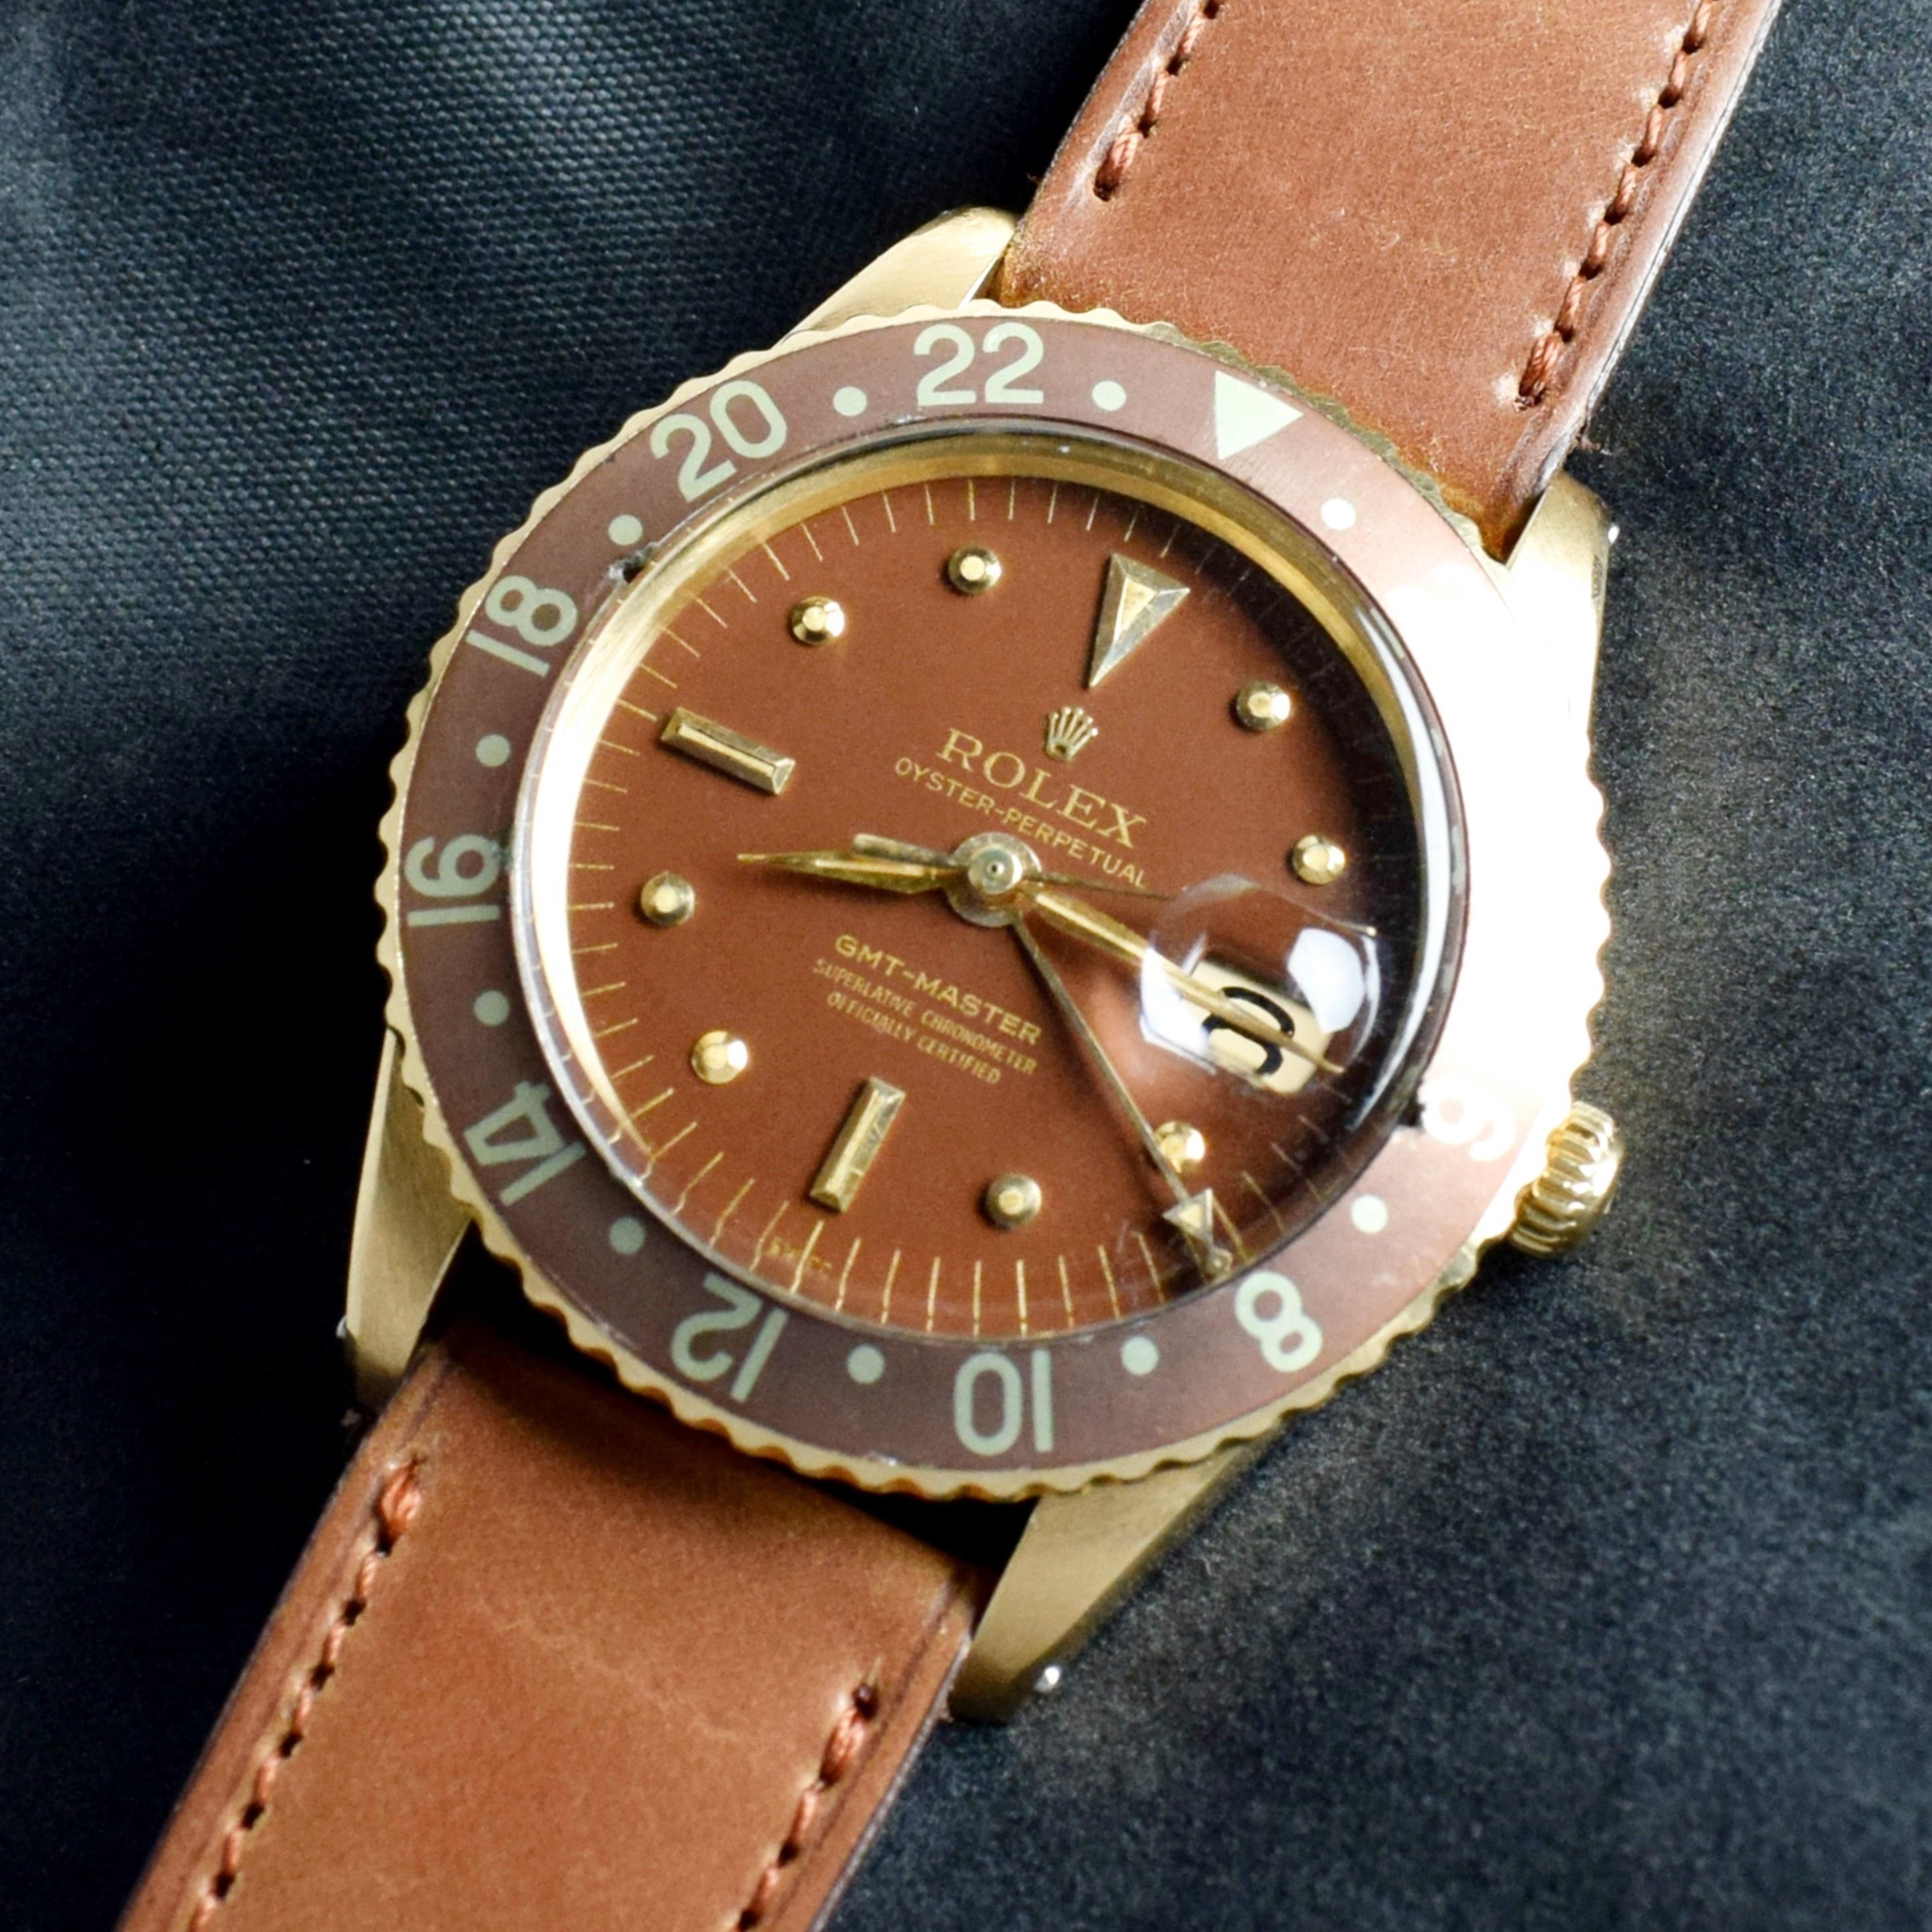 Brand: Vintage Rolex
Model: 1675
Year: 1963
Serial number: 99xxxx
Reference: C03653
Case: 40mm without crown & no crown guard; Show sign of wear with slight polish from previous; inner case back stamped 1675; the model and serial engraving is hard